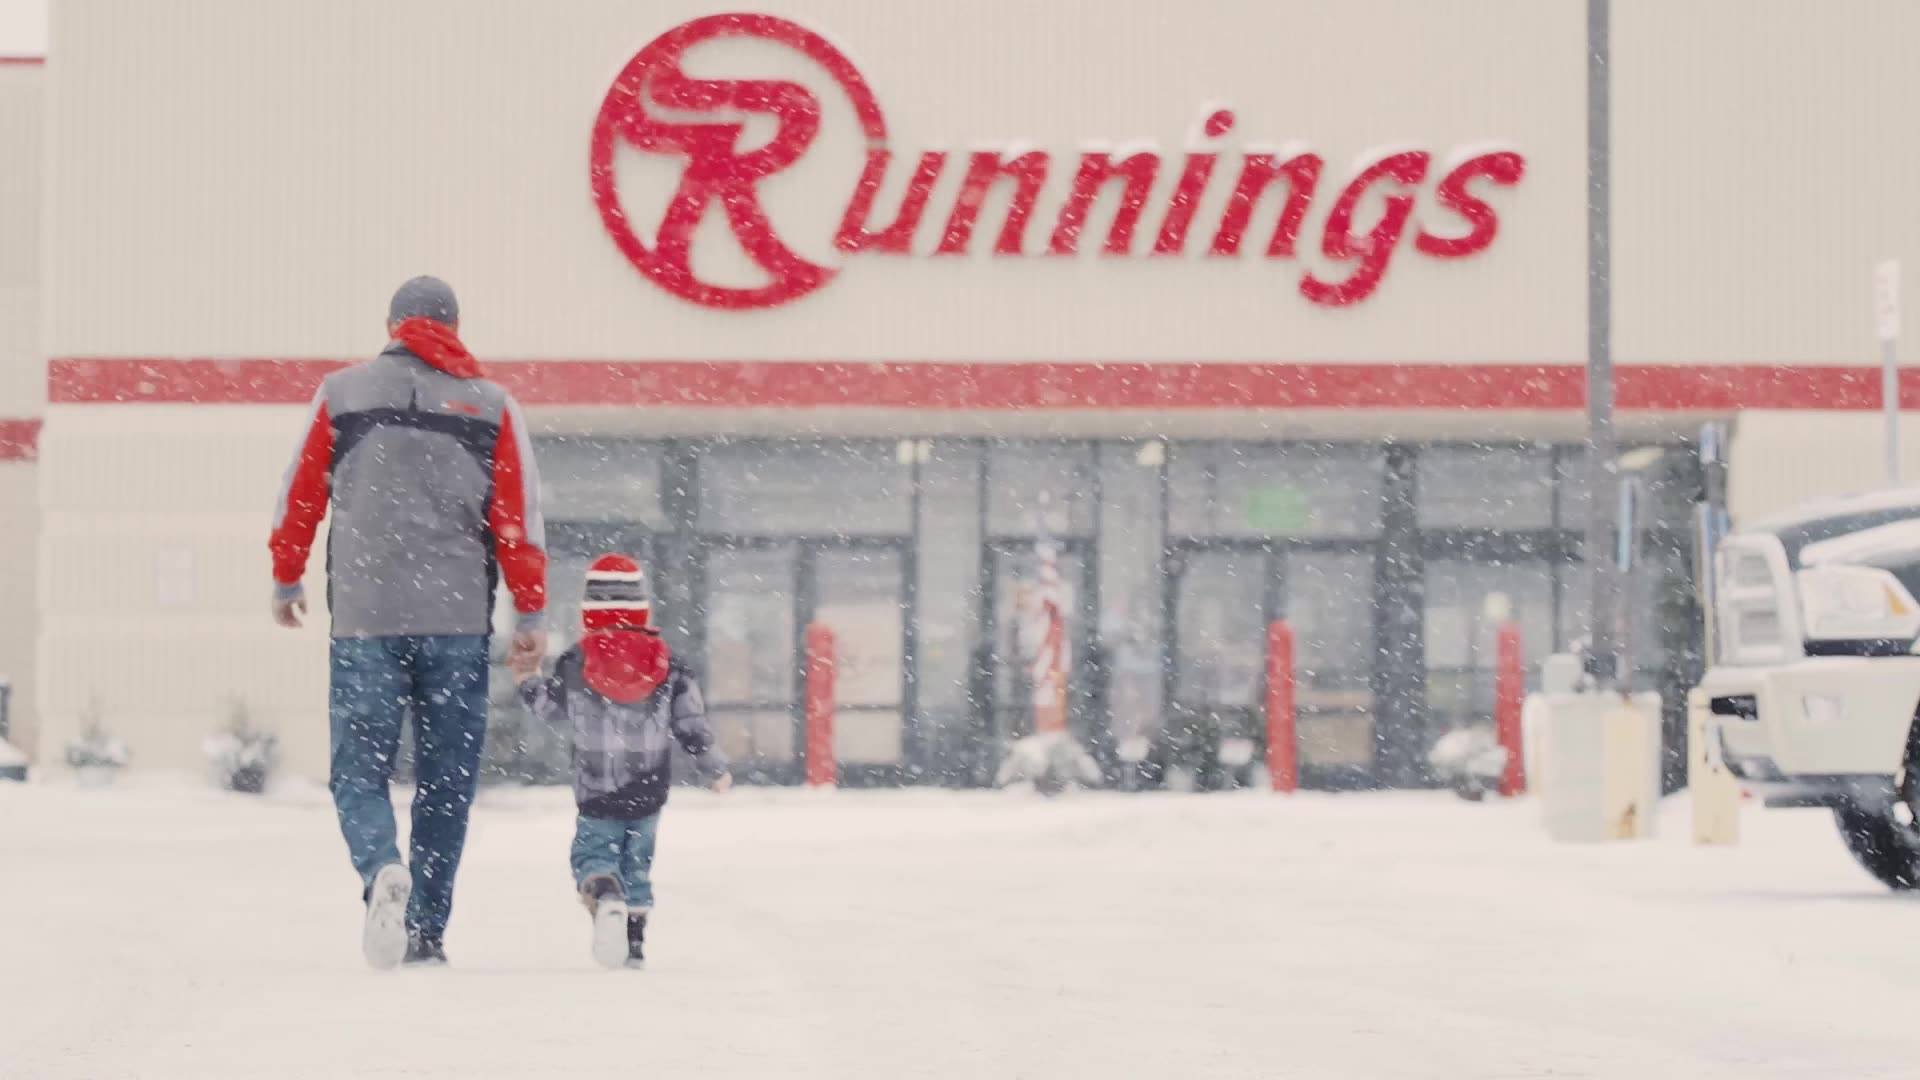 Image of father and son walking to Running store in a snow storm